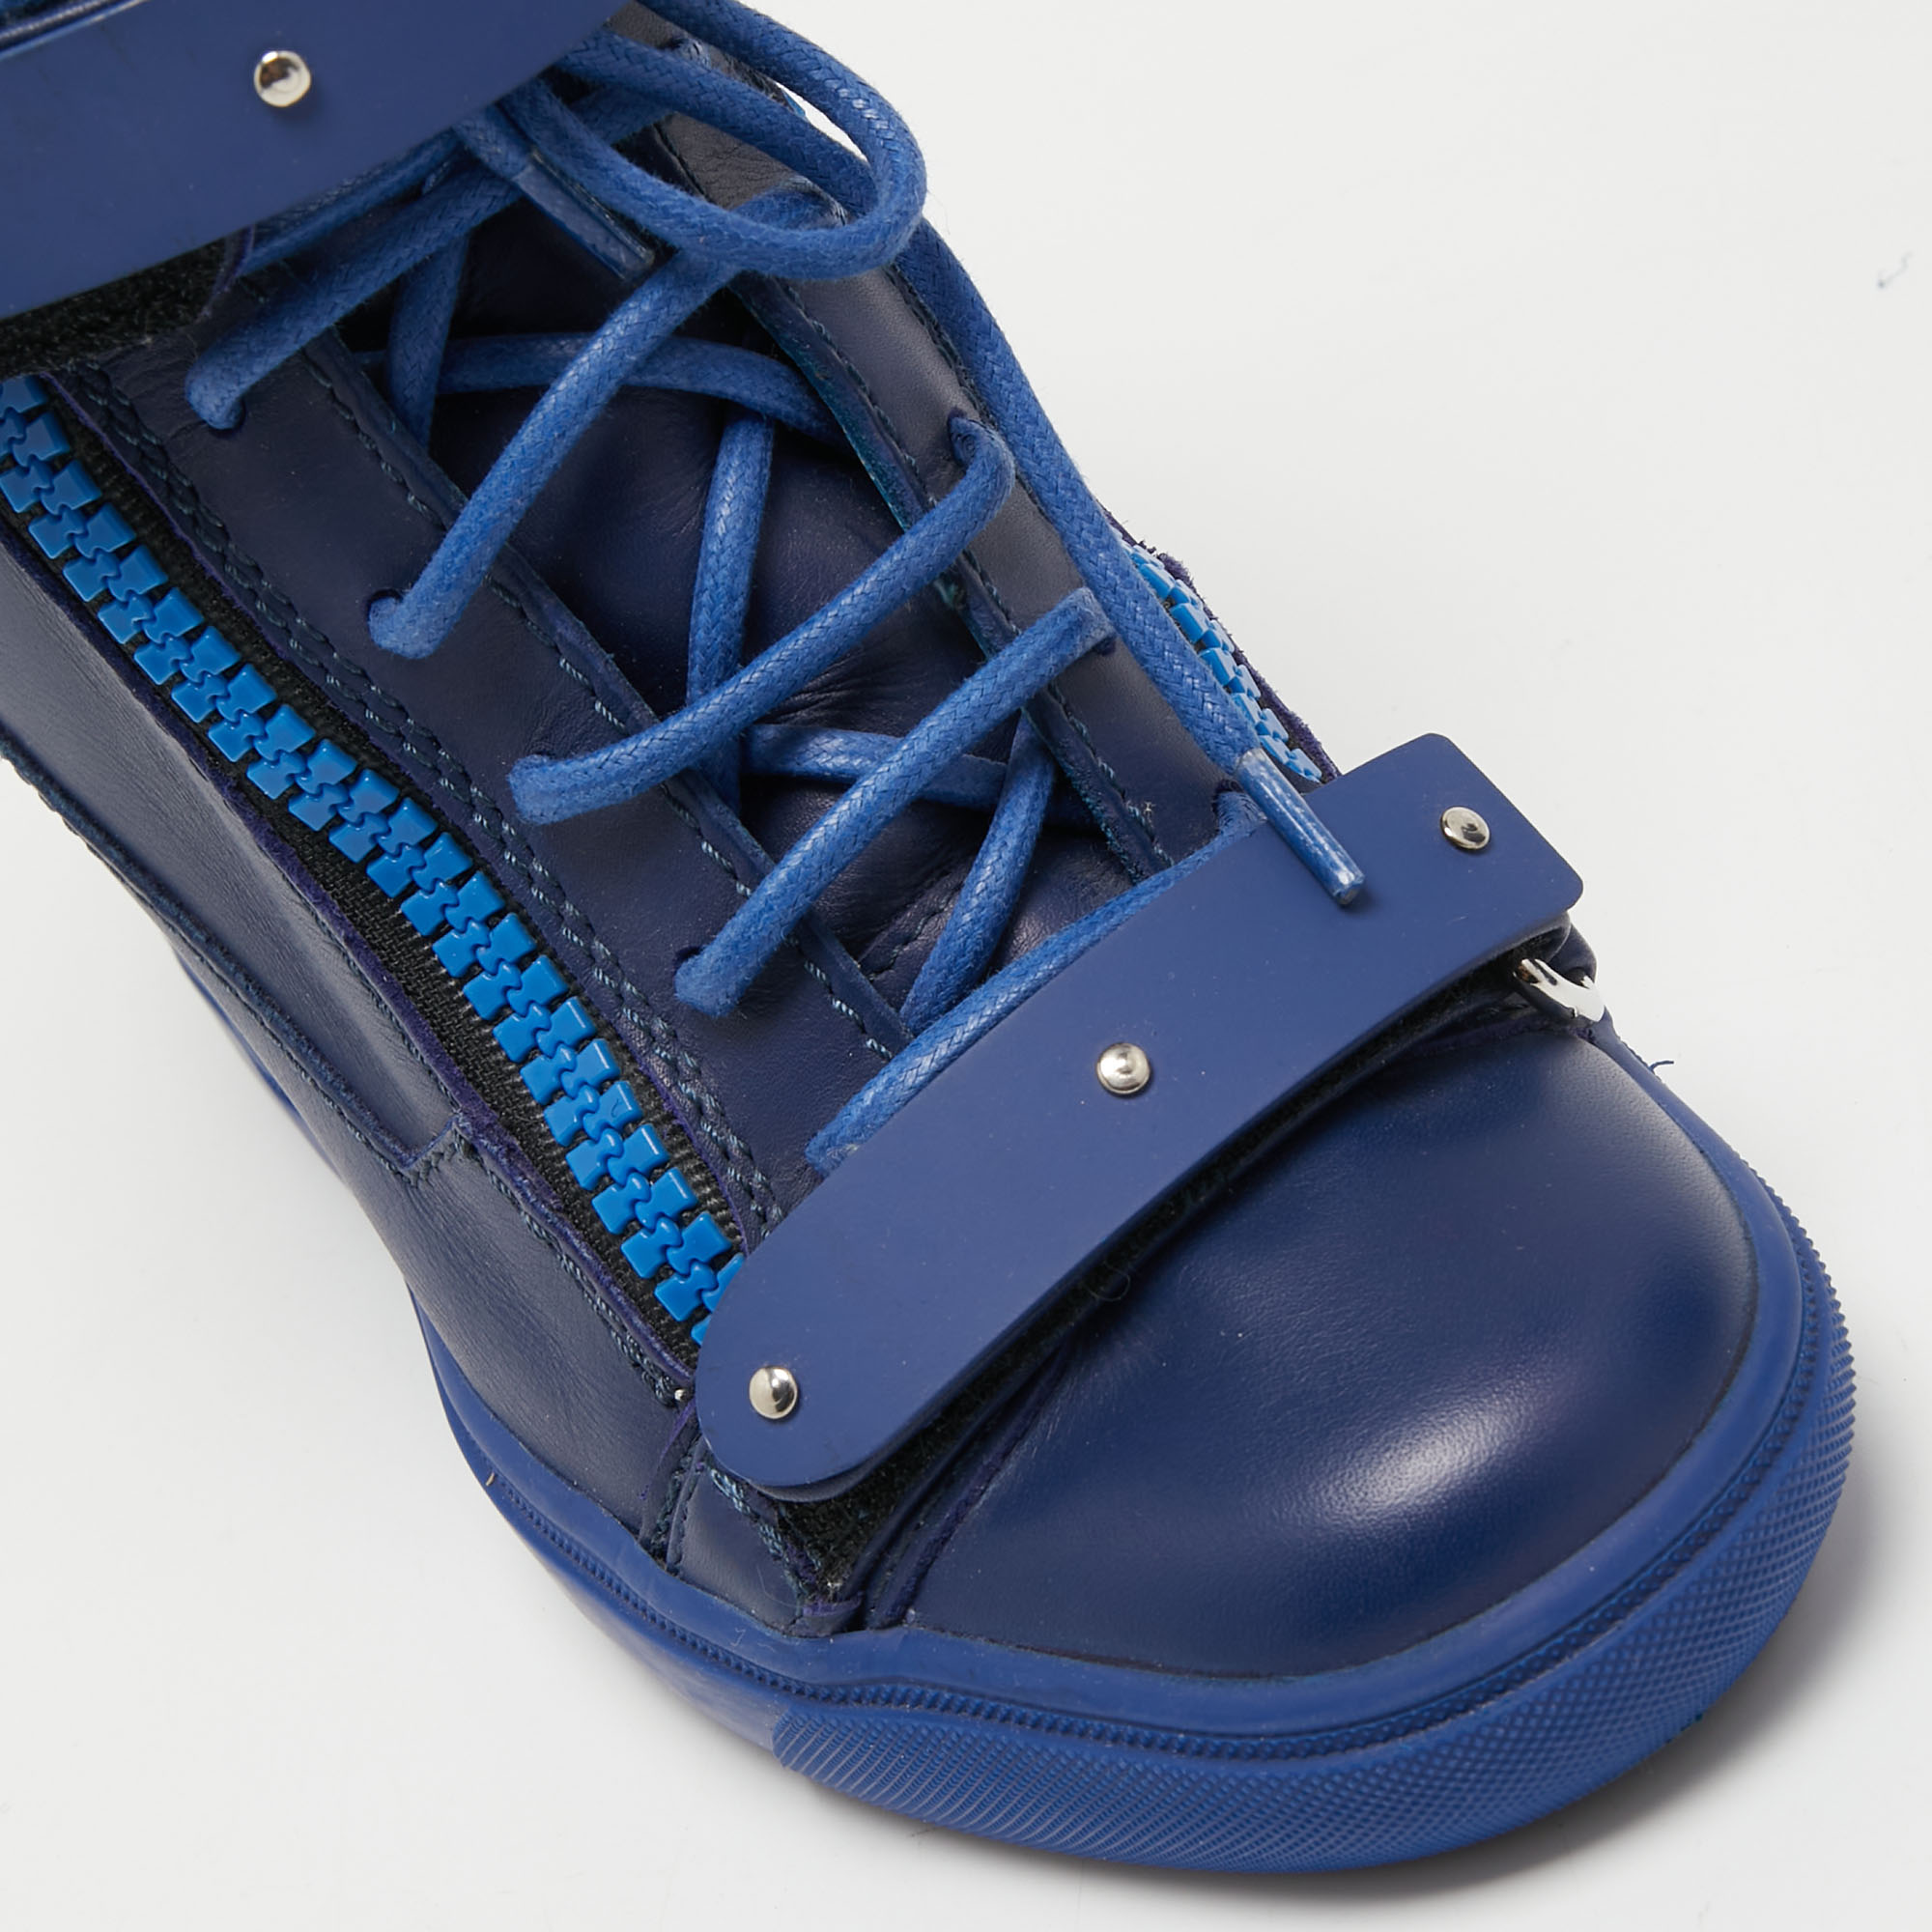 Giuseppe Zanotti Blue Leather Wedges Sneakers Size 36